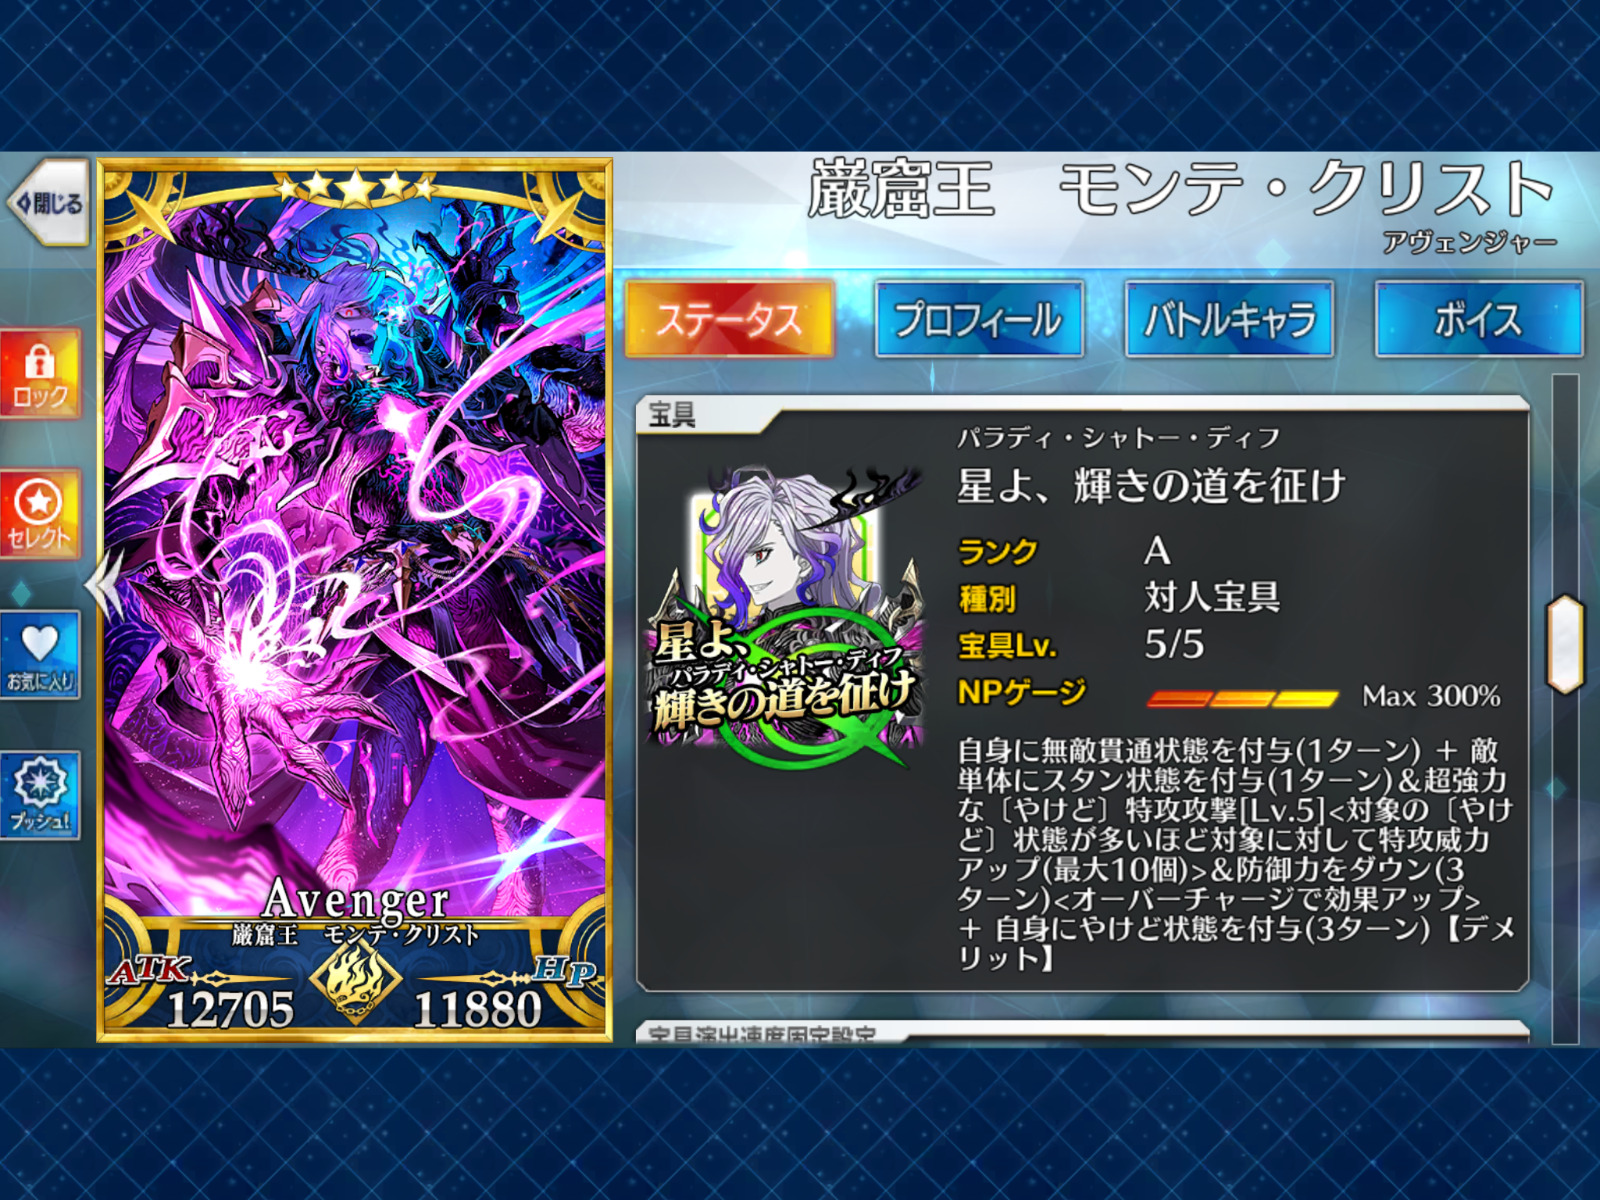 JP Fate Grand Order FGO Endgame Account OC: Count NP5 Alice Draco Marie Alter